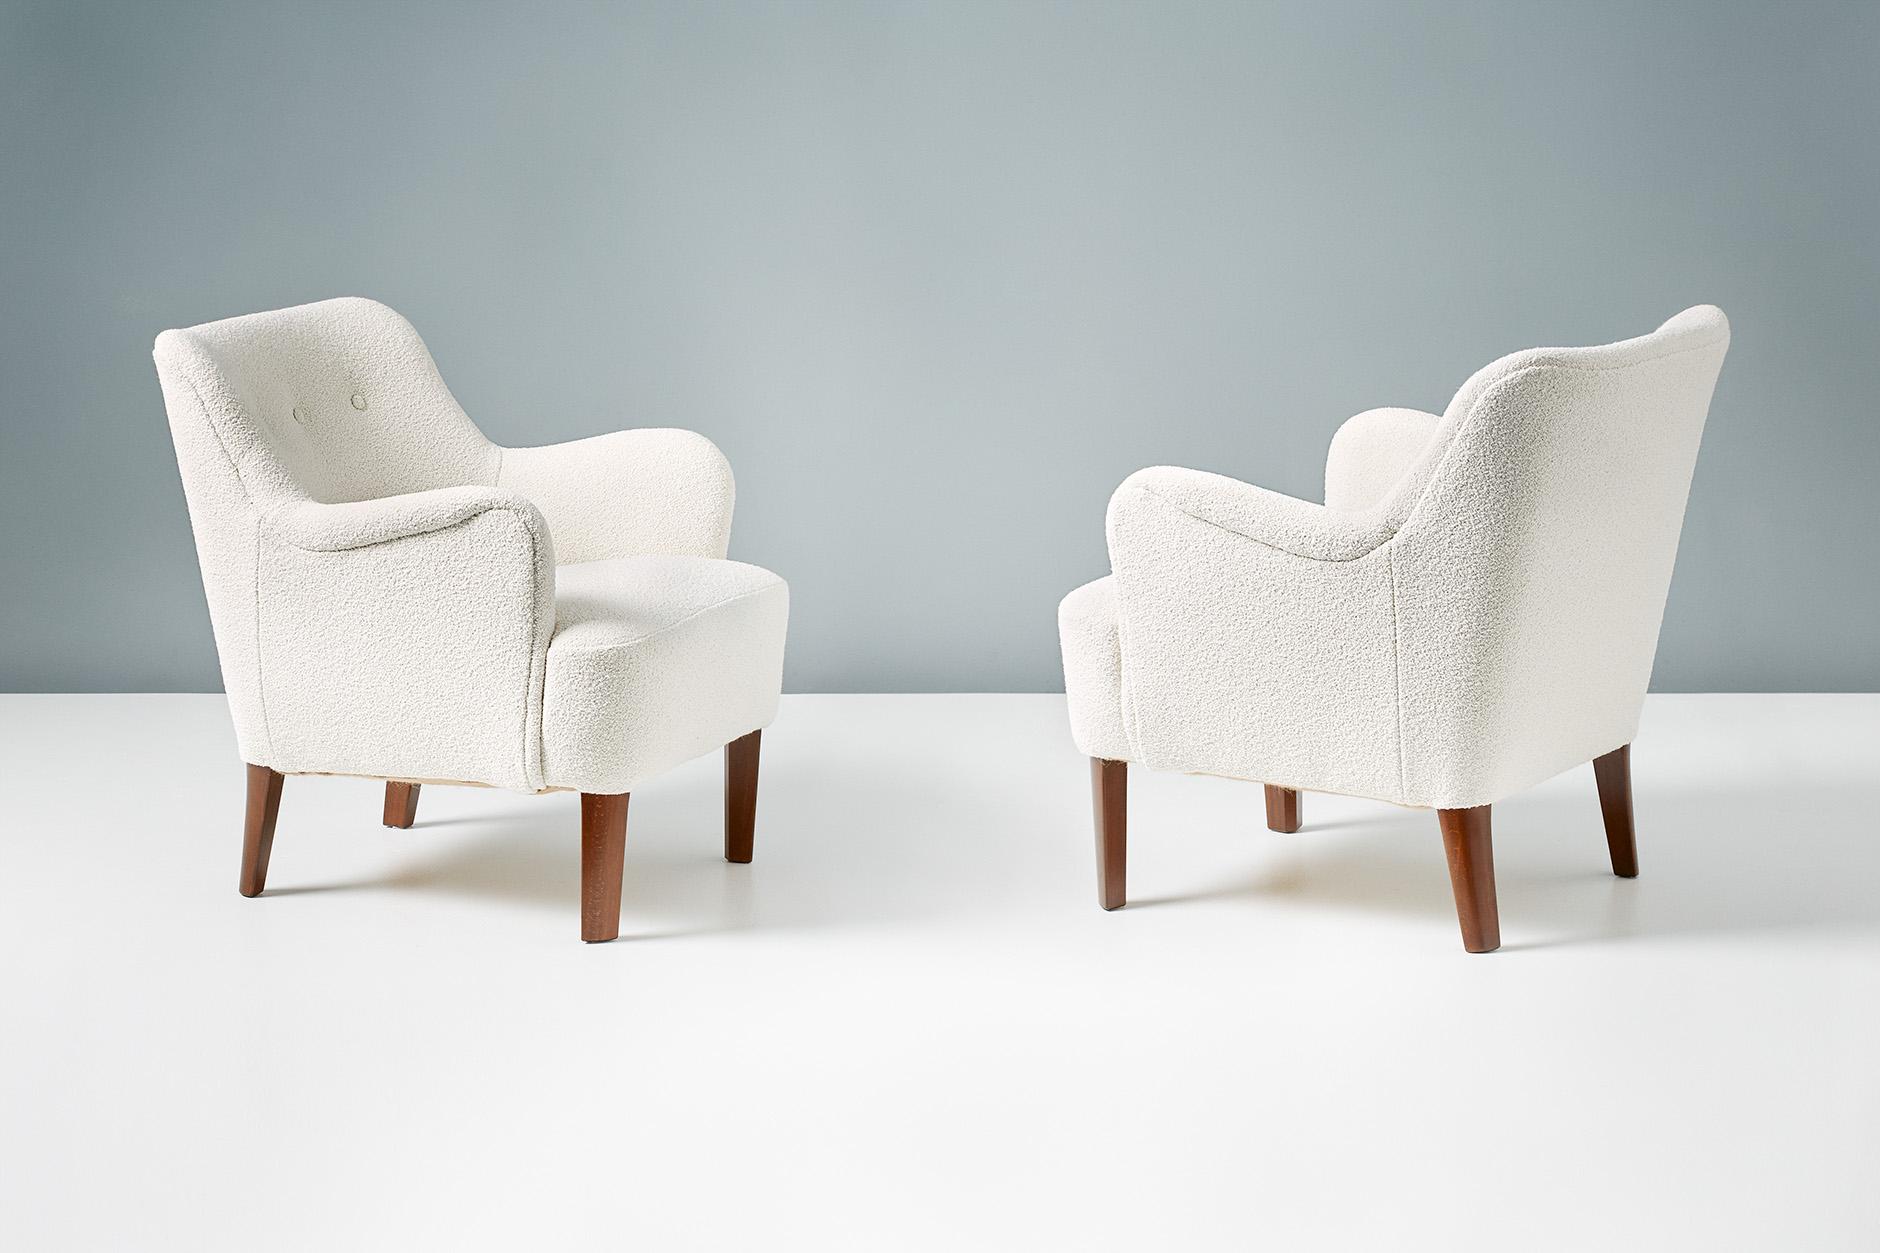 Peter Hvidt.

Model 1748 lounge chairs, circa 1940s.

These elegant low-back lounge chairs were produced by Fritz Hansen in Denmark in the late 1940s by master designer Peter Hvidt. The beech legs have been walnut-stained and both chairs have